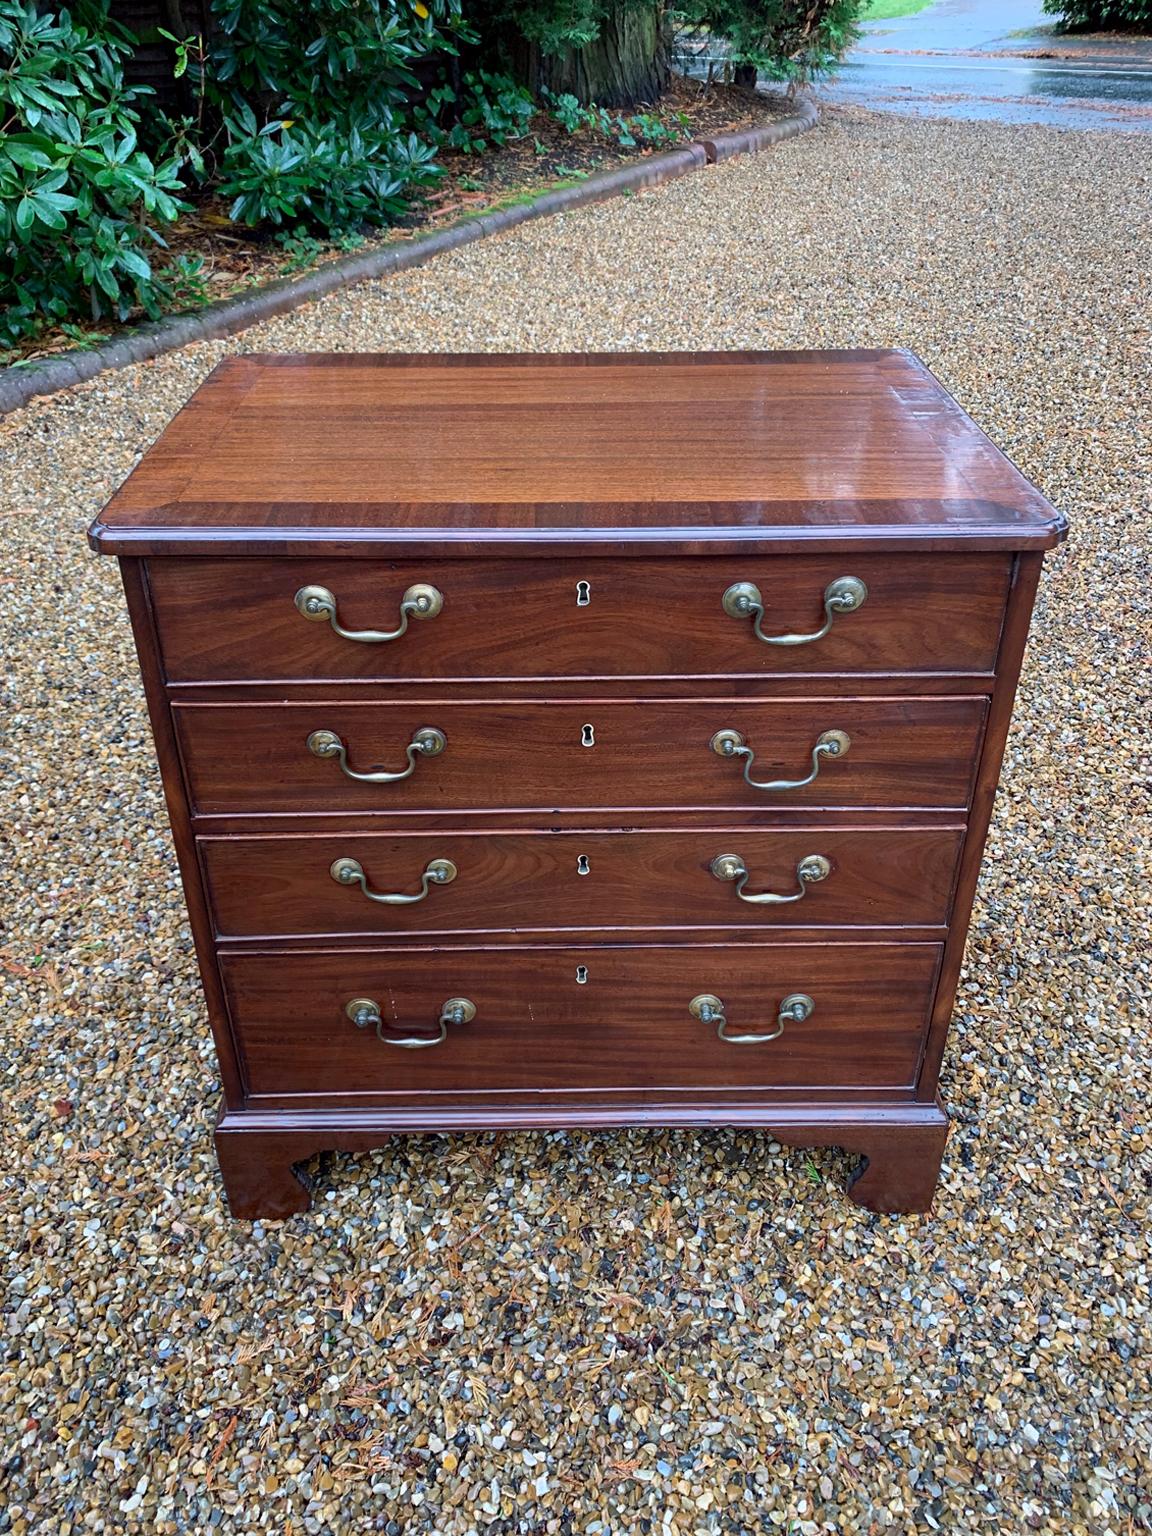 Georgian mahogany chest of drawers with oak lined drawers and brass swan neck handles,

circa 1820.

Dimensions:
Height: 31 inches - 79 cms
Width: 29.5 inches - 75 cms
Depth: 19 inches - 49 cms

Reference: C1323